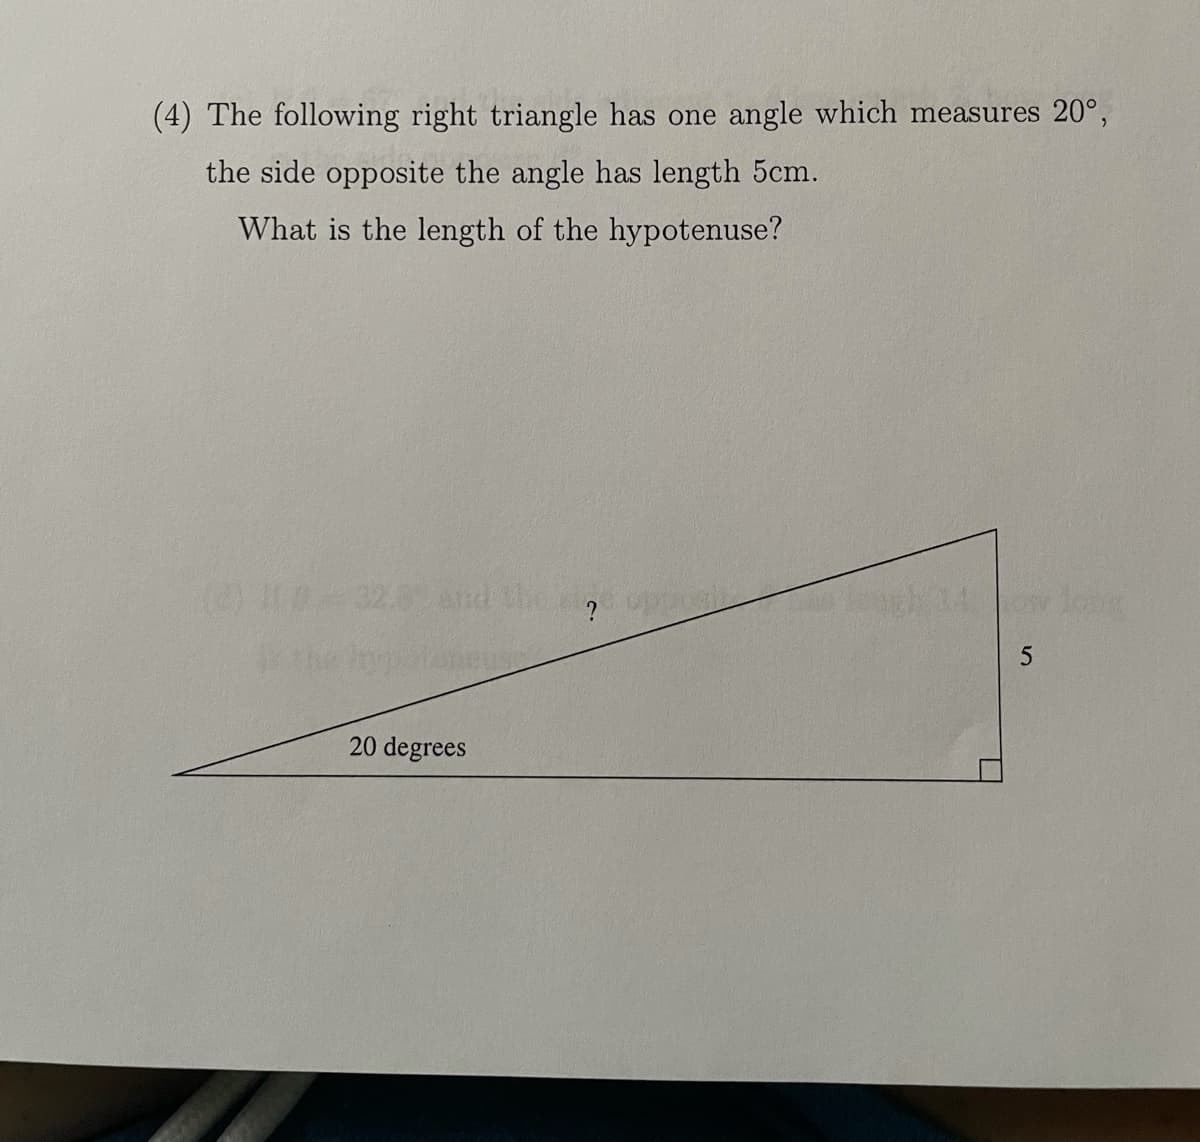 (4) The following right triangle has one angle which measures 20°,
the side opposite the angle has length 5cm.
What is the length of the hypotenuse?
LO032.0and the
20 degrees
